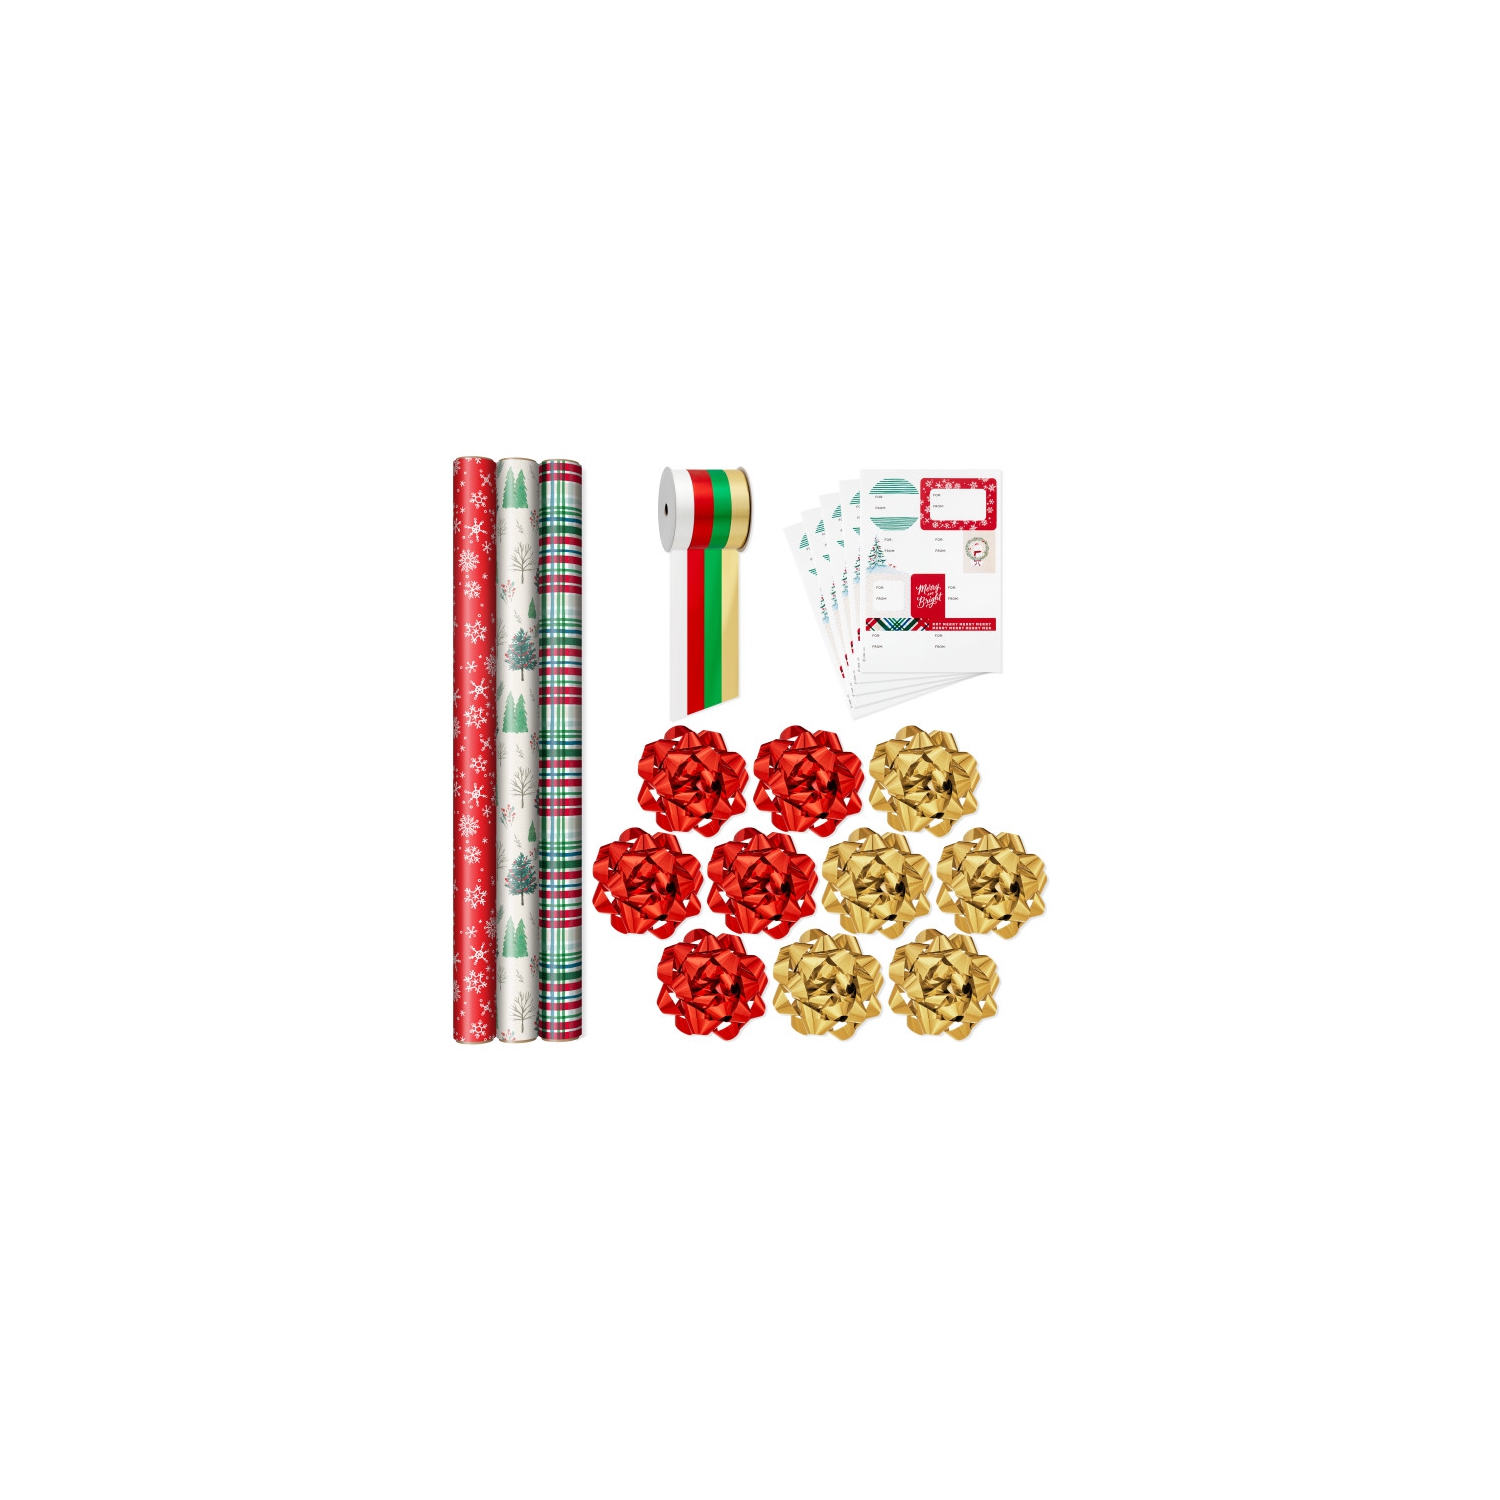 Hallmark Rustic Red and Green Christmas Wrapping Paper Set (90 sq. ft. ttl,  10 Bows, 4 Ribbon Colors, 40 Gift Tag Stickers) Snowflakes, Trees, Plaid